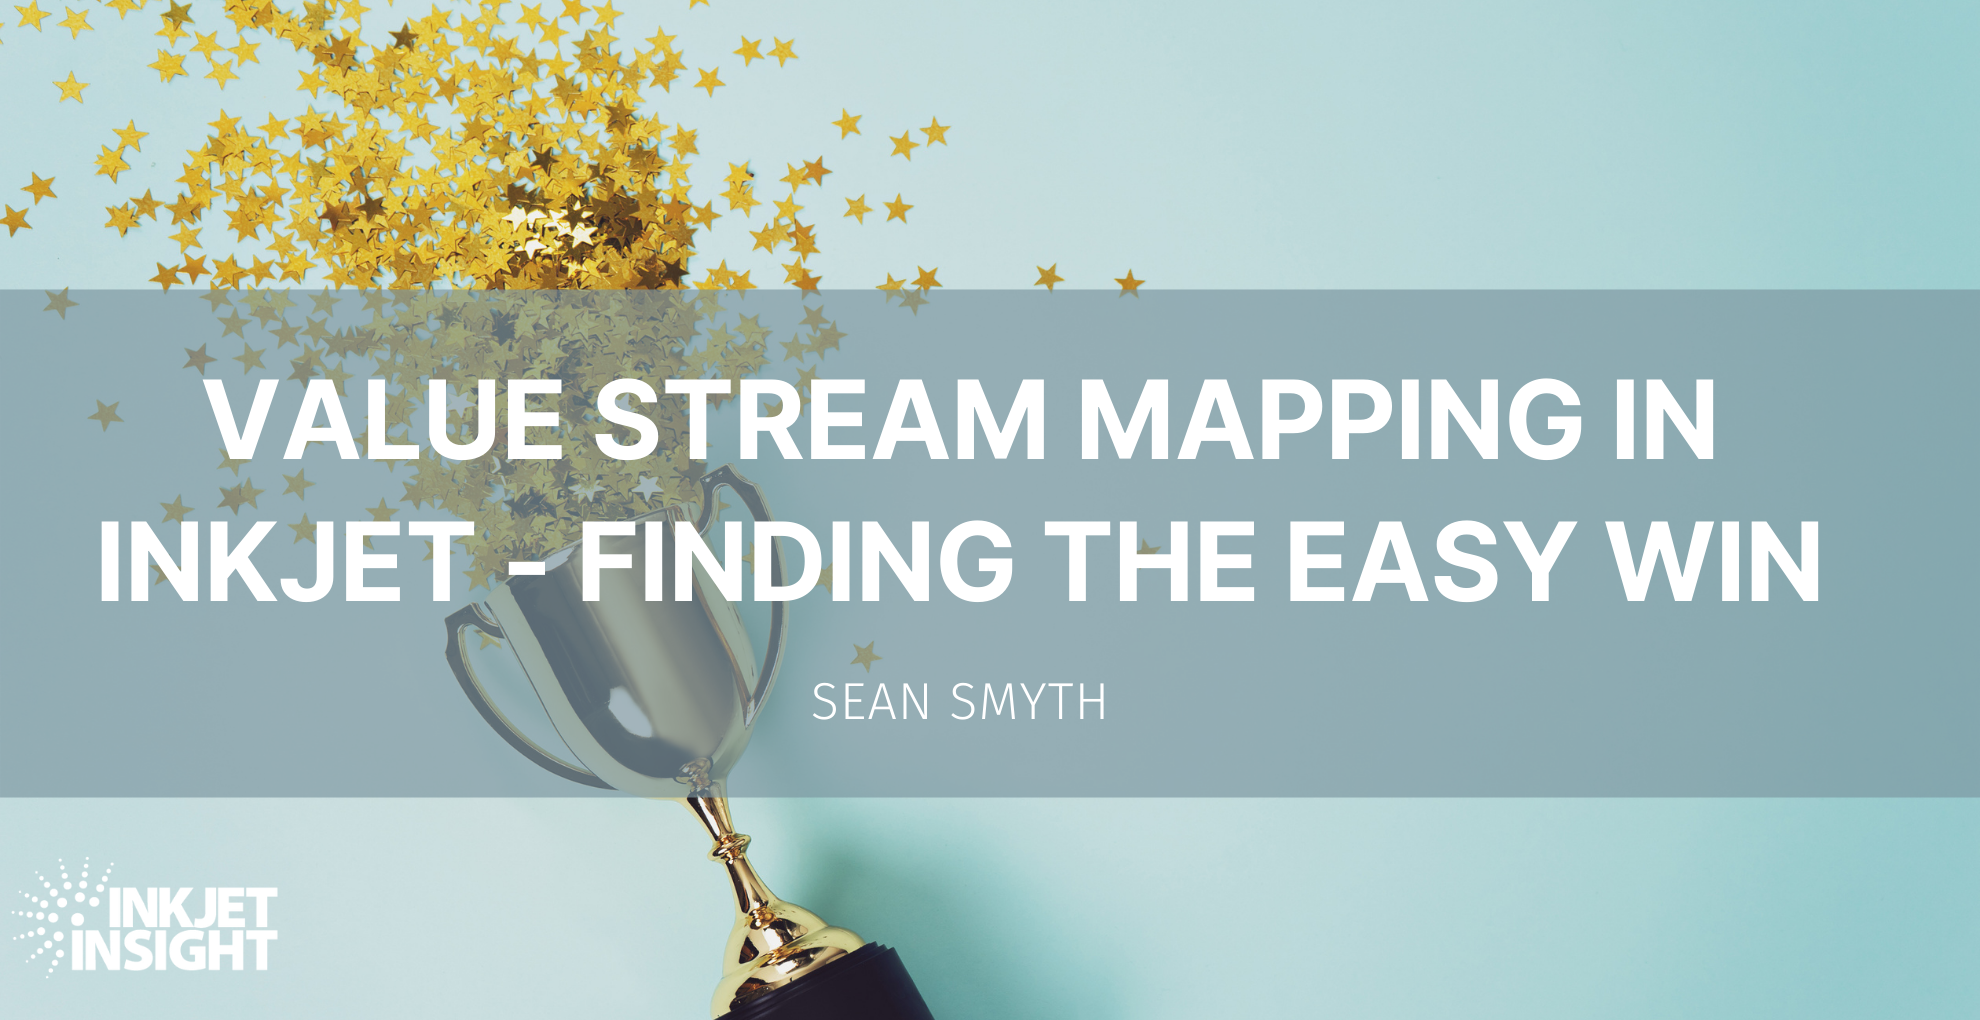 Featured image for “Value Stream Mapping in Inkjet. Finding the Easy Win”